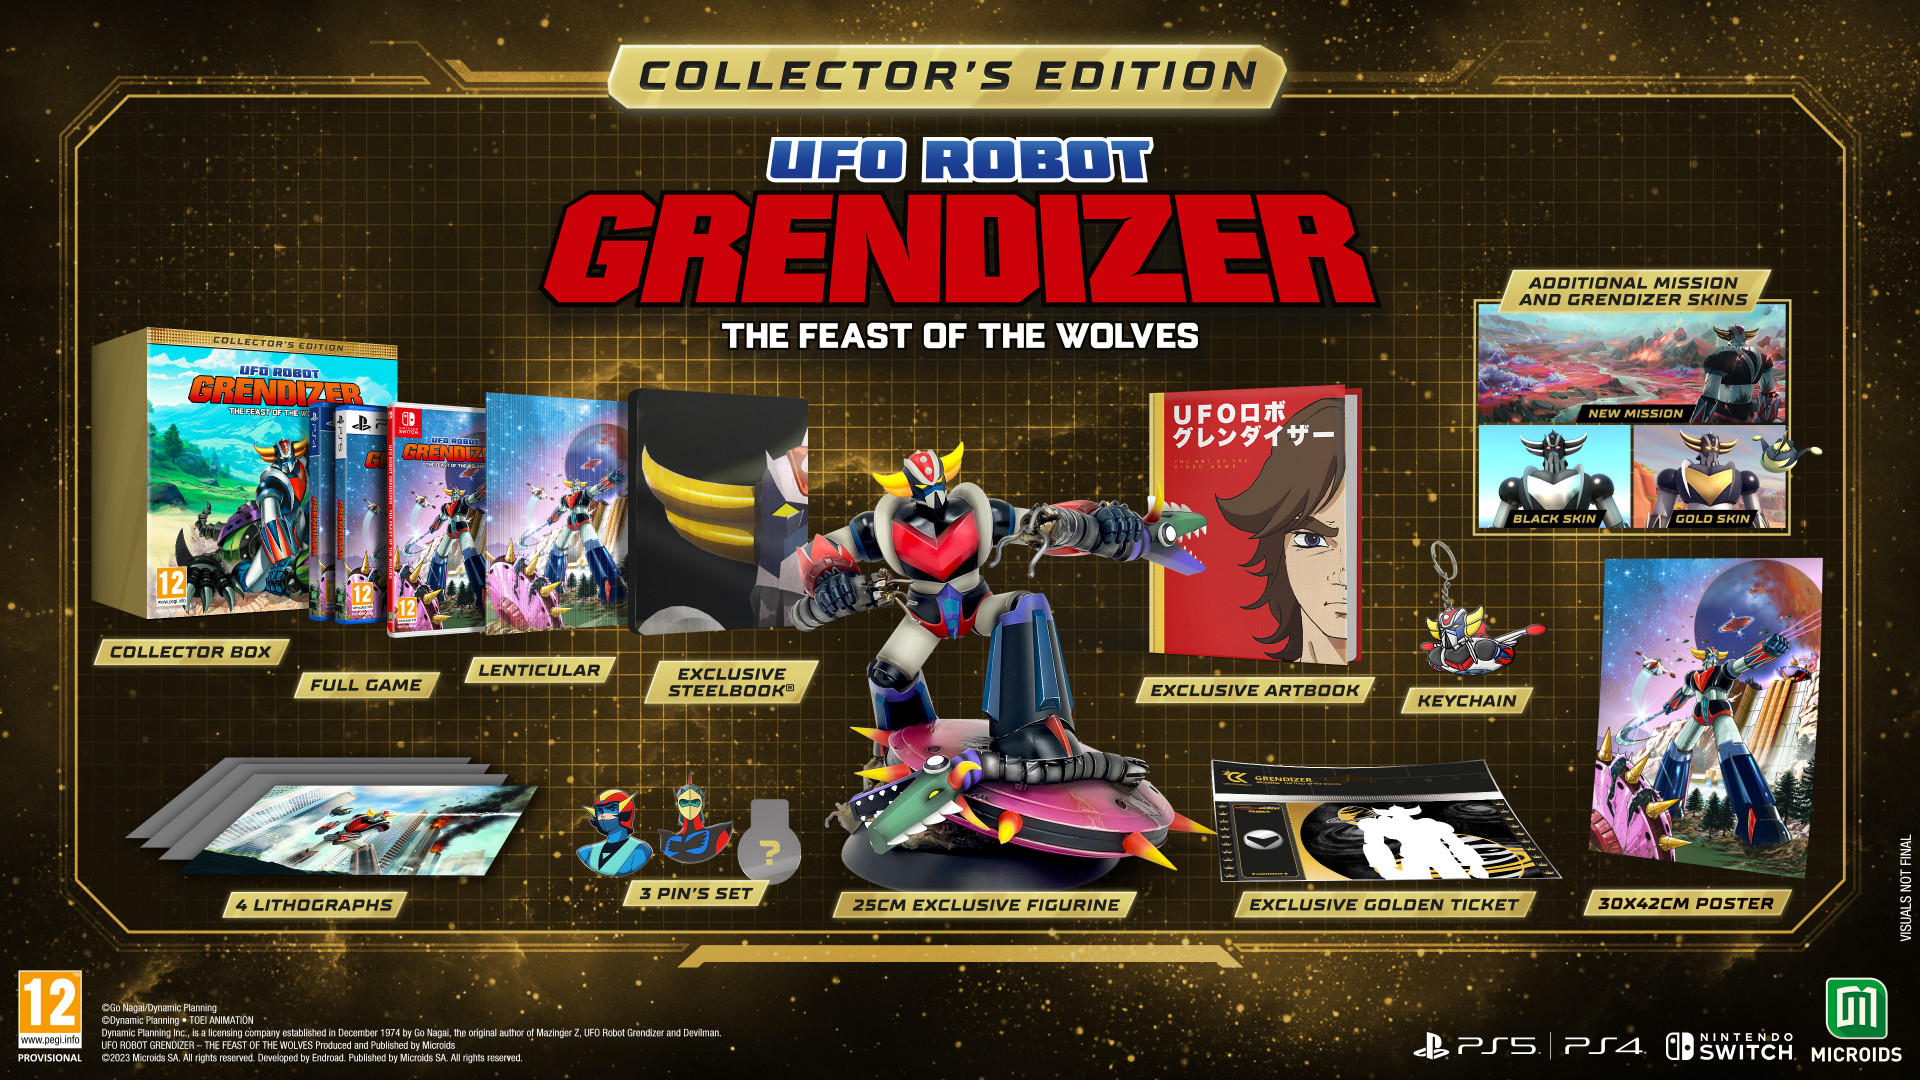 UFO Robot Grendizer: The Feast of the Wolves Collector's Edition - Nintendo Switch